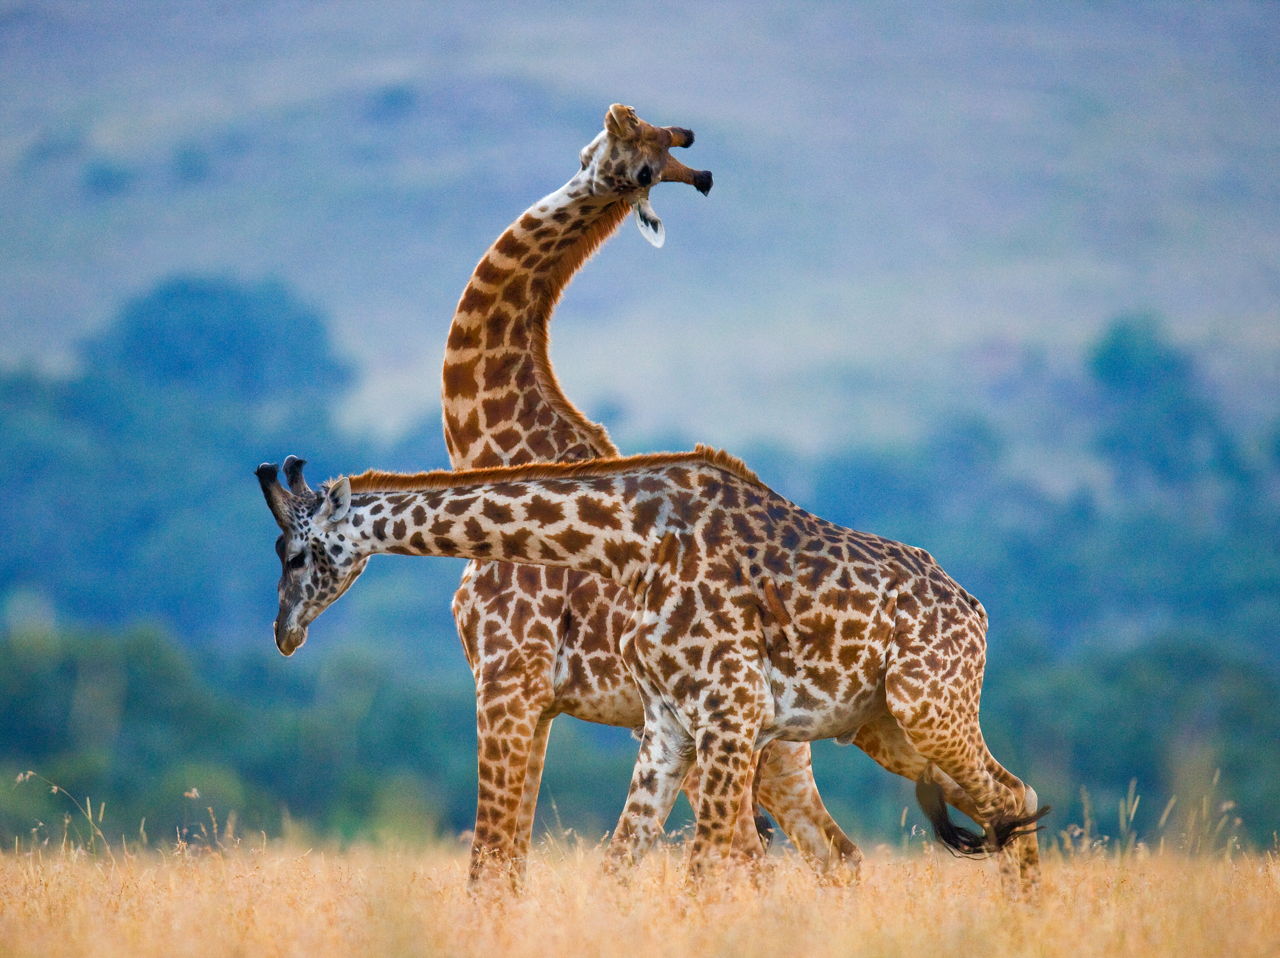 Most People Can’t Match 16/24 of These National Animals to Their Country on a Map – Can You? Giraffe